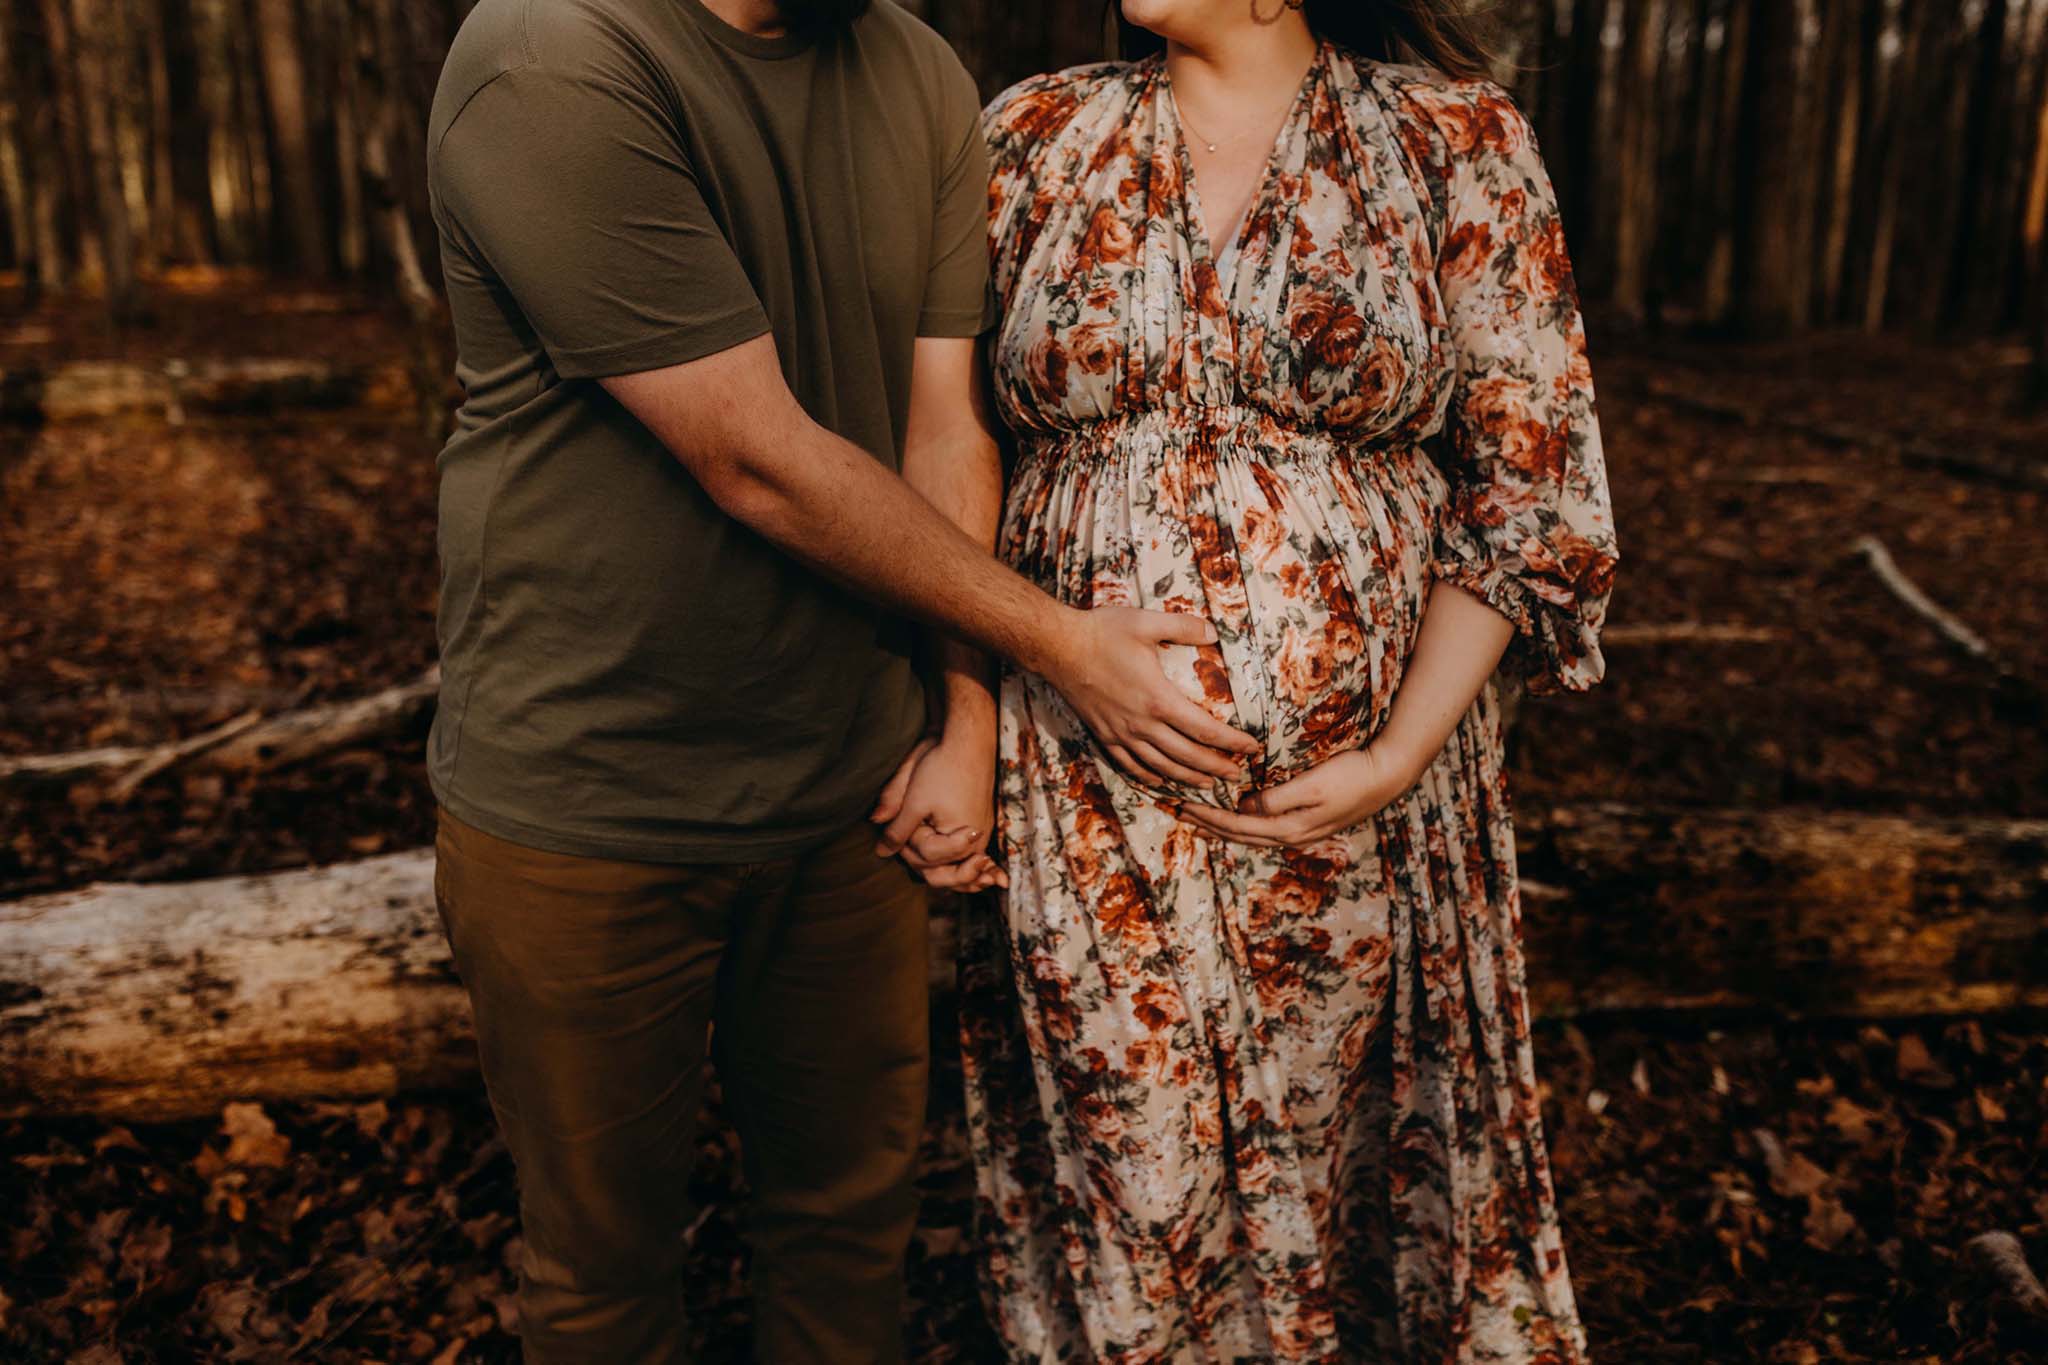 Mom and dad holding their baby belly bump for maternity photos.